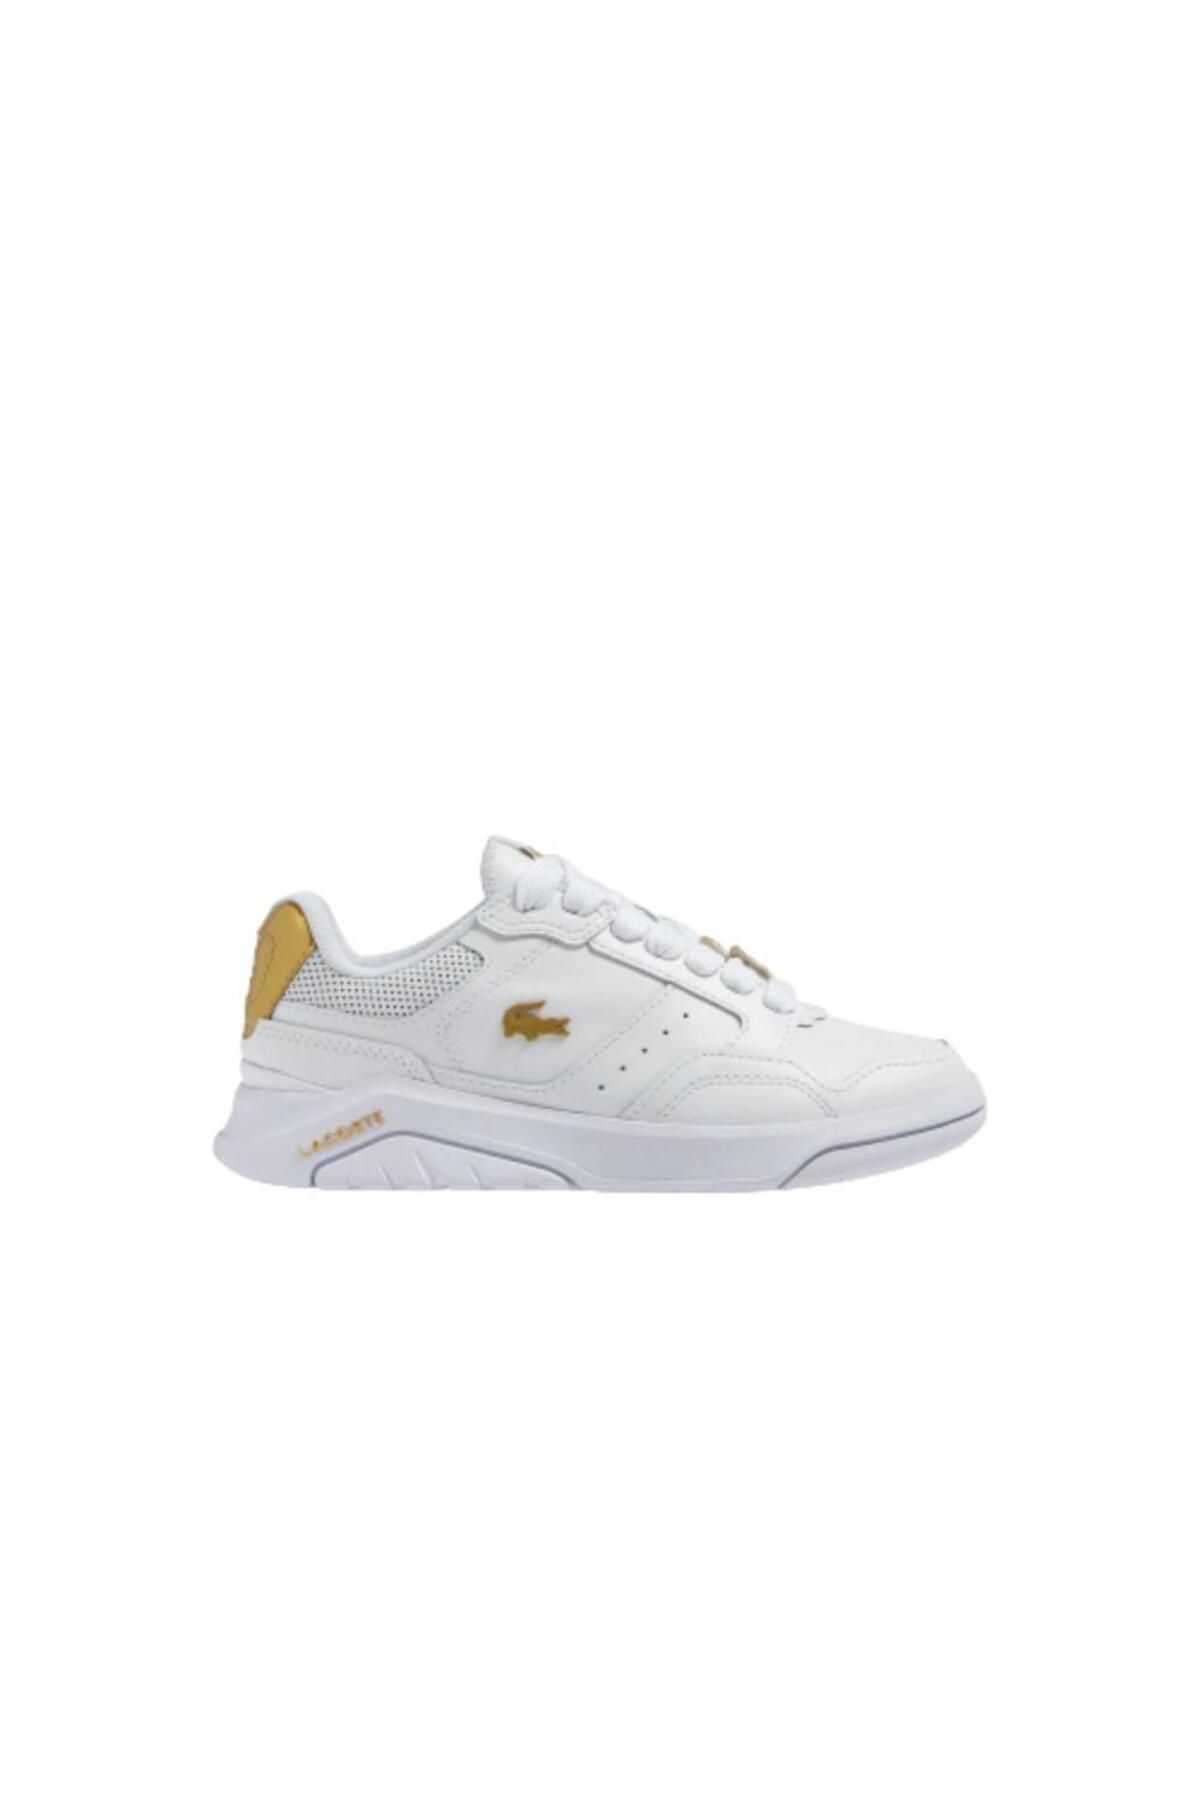 Lacoste GAME ADVANCE LX 123